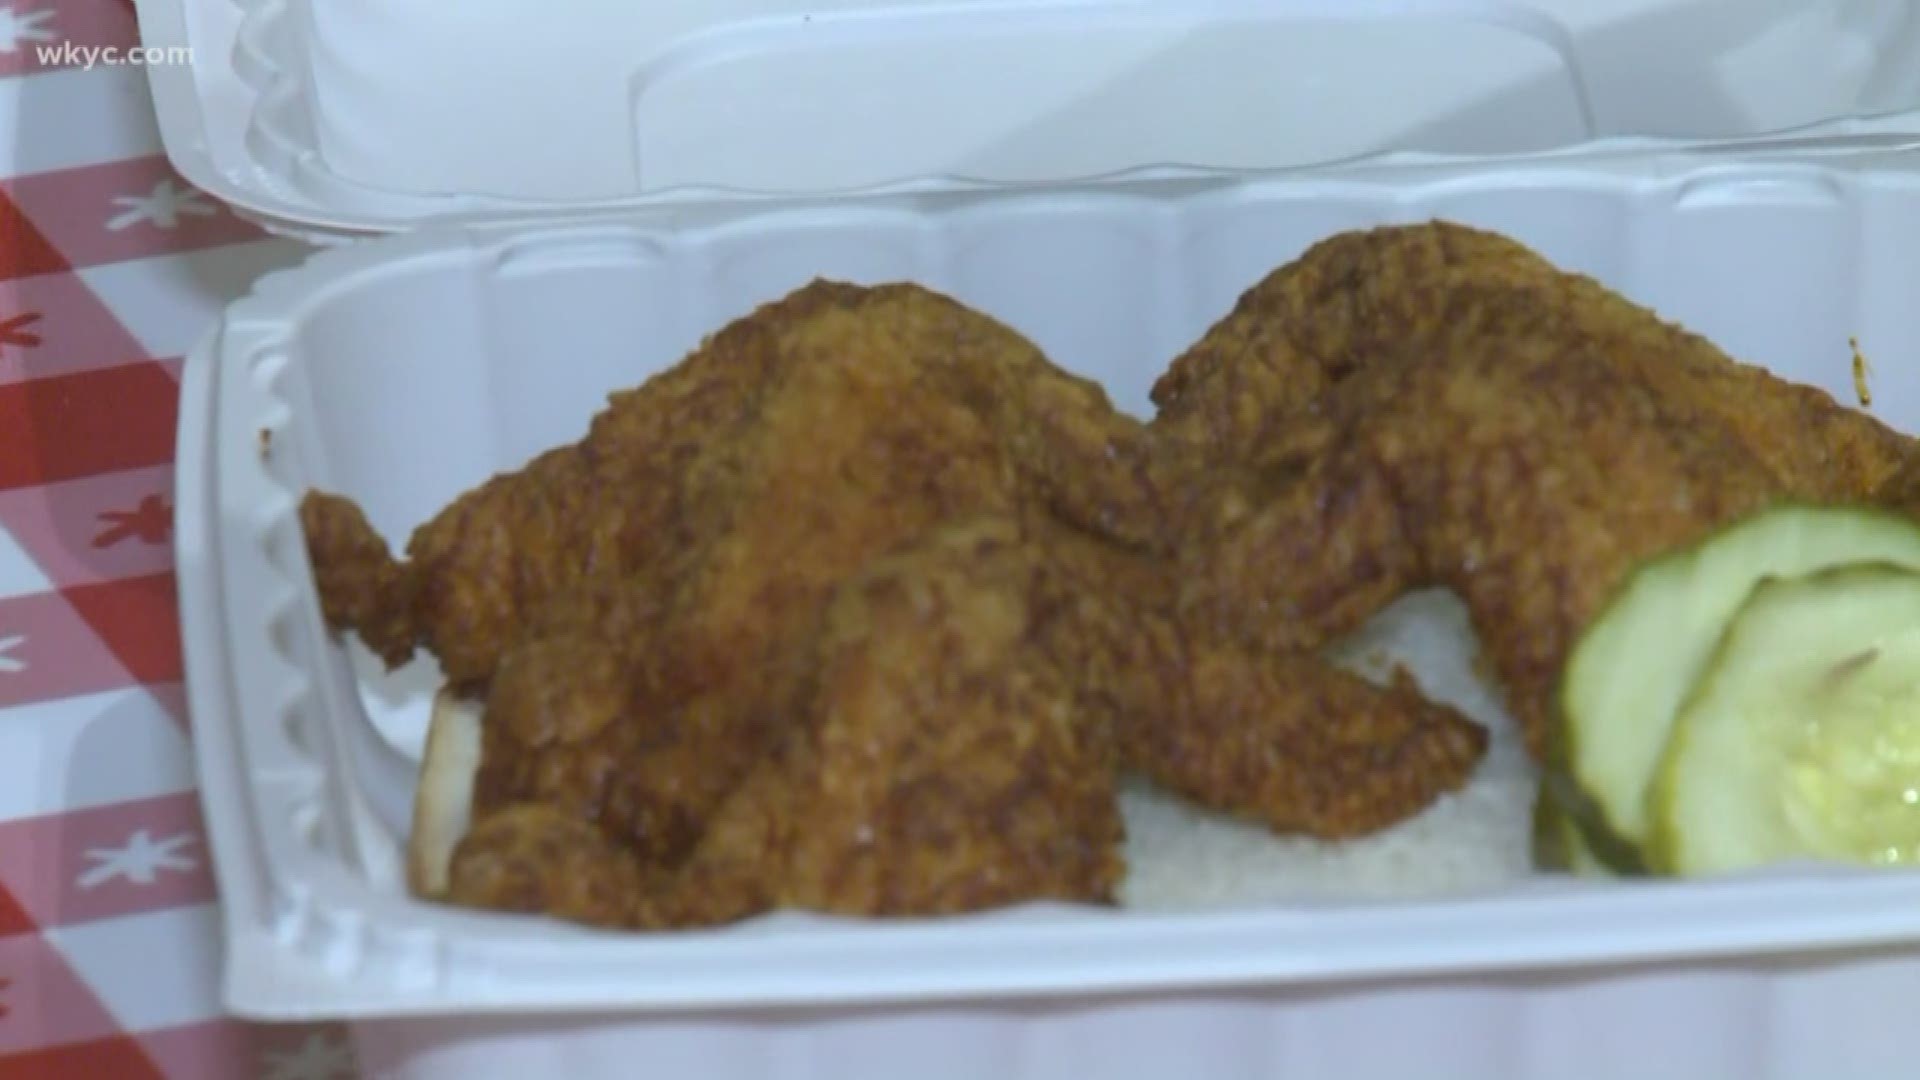 Oct. 8, 2019: The Columbus-based chicken chain specializes in Nashville-style hot fried chicken. Here's what you can expect at their new Crocker Park location.